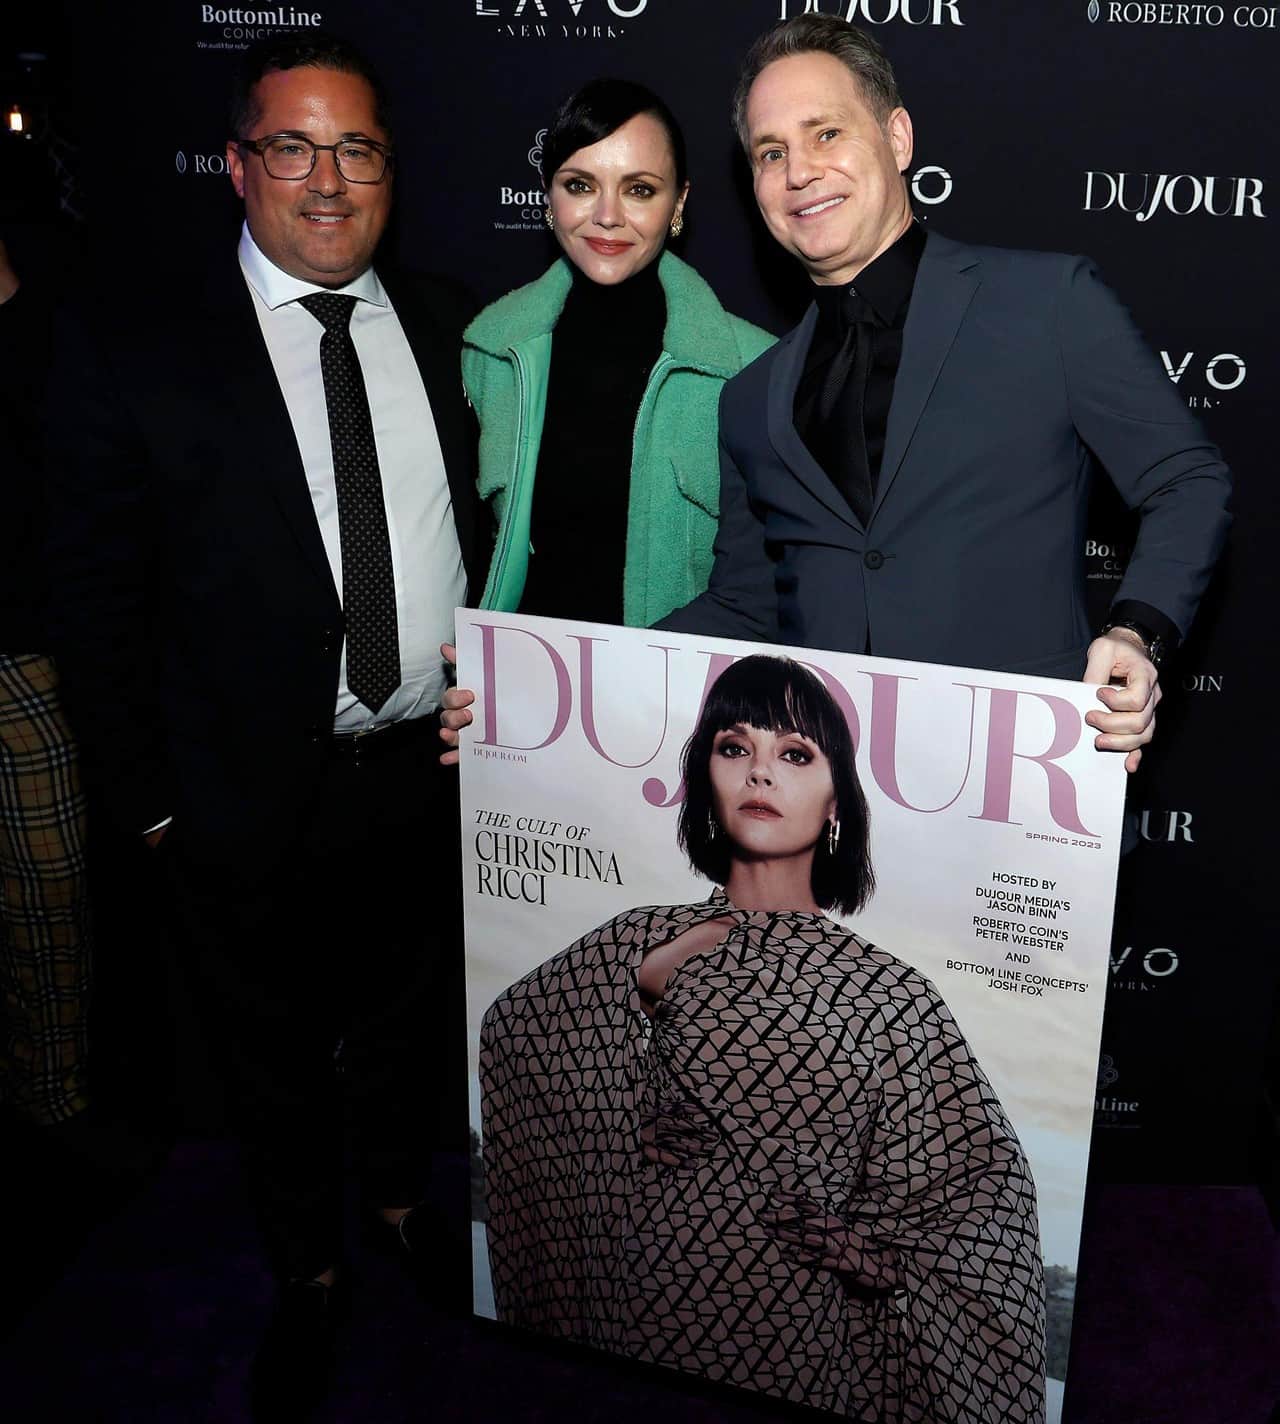 Christina Ricci Shines at Her "DuJour" Spring 2023 Cover Party